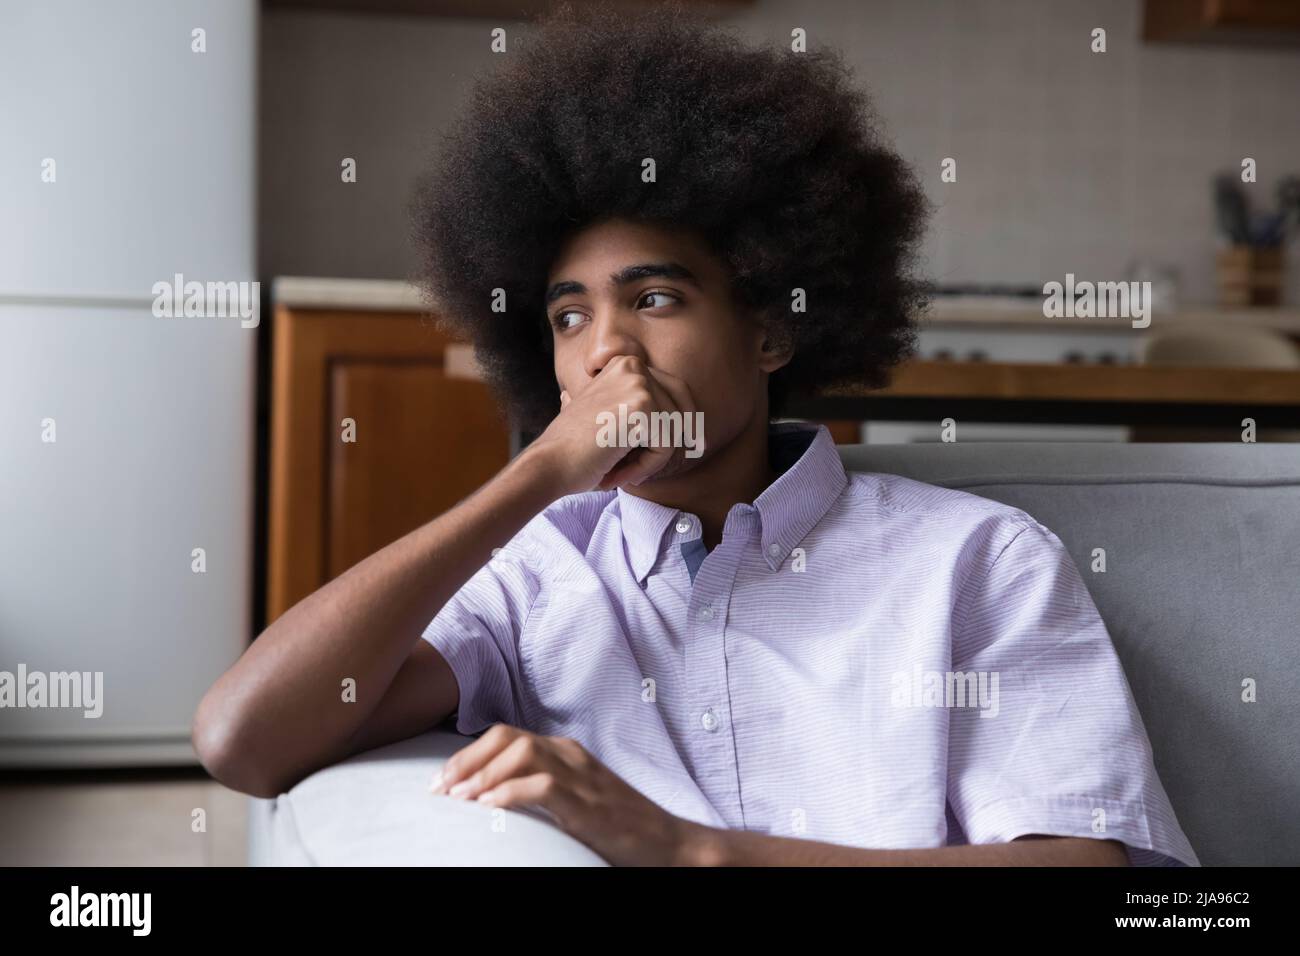 Pensive frustrated teenage African guy sitting on couch Stock Photo